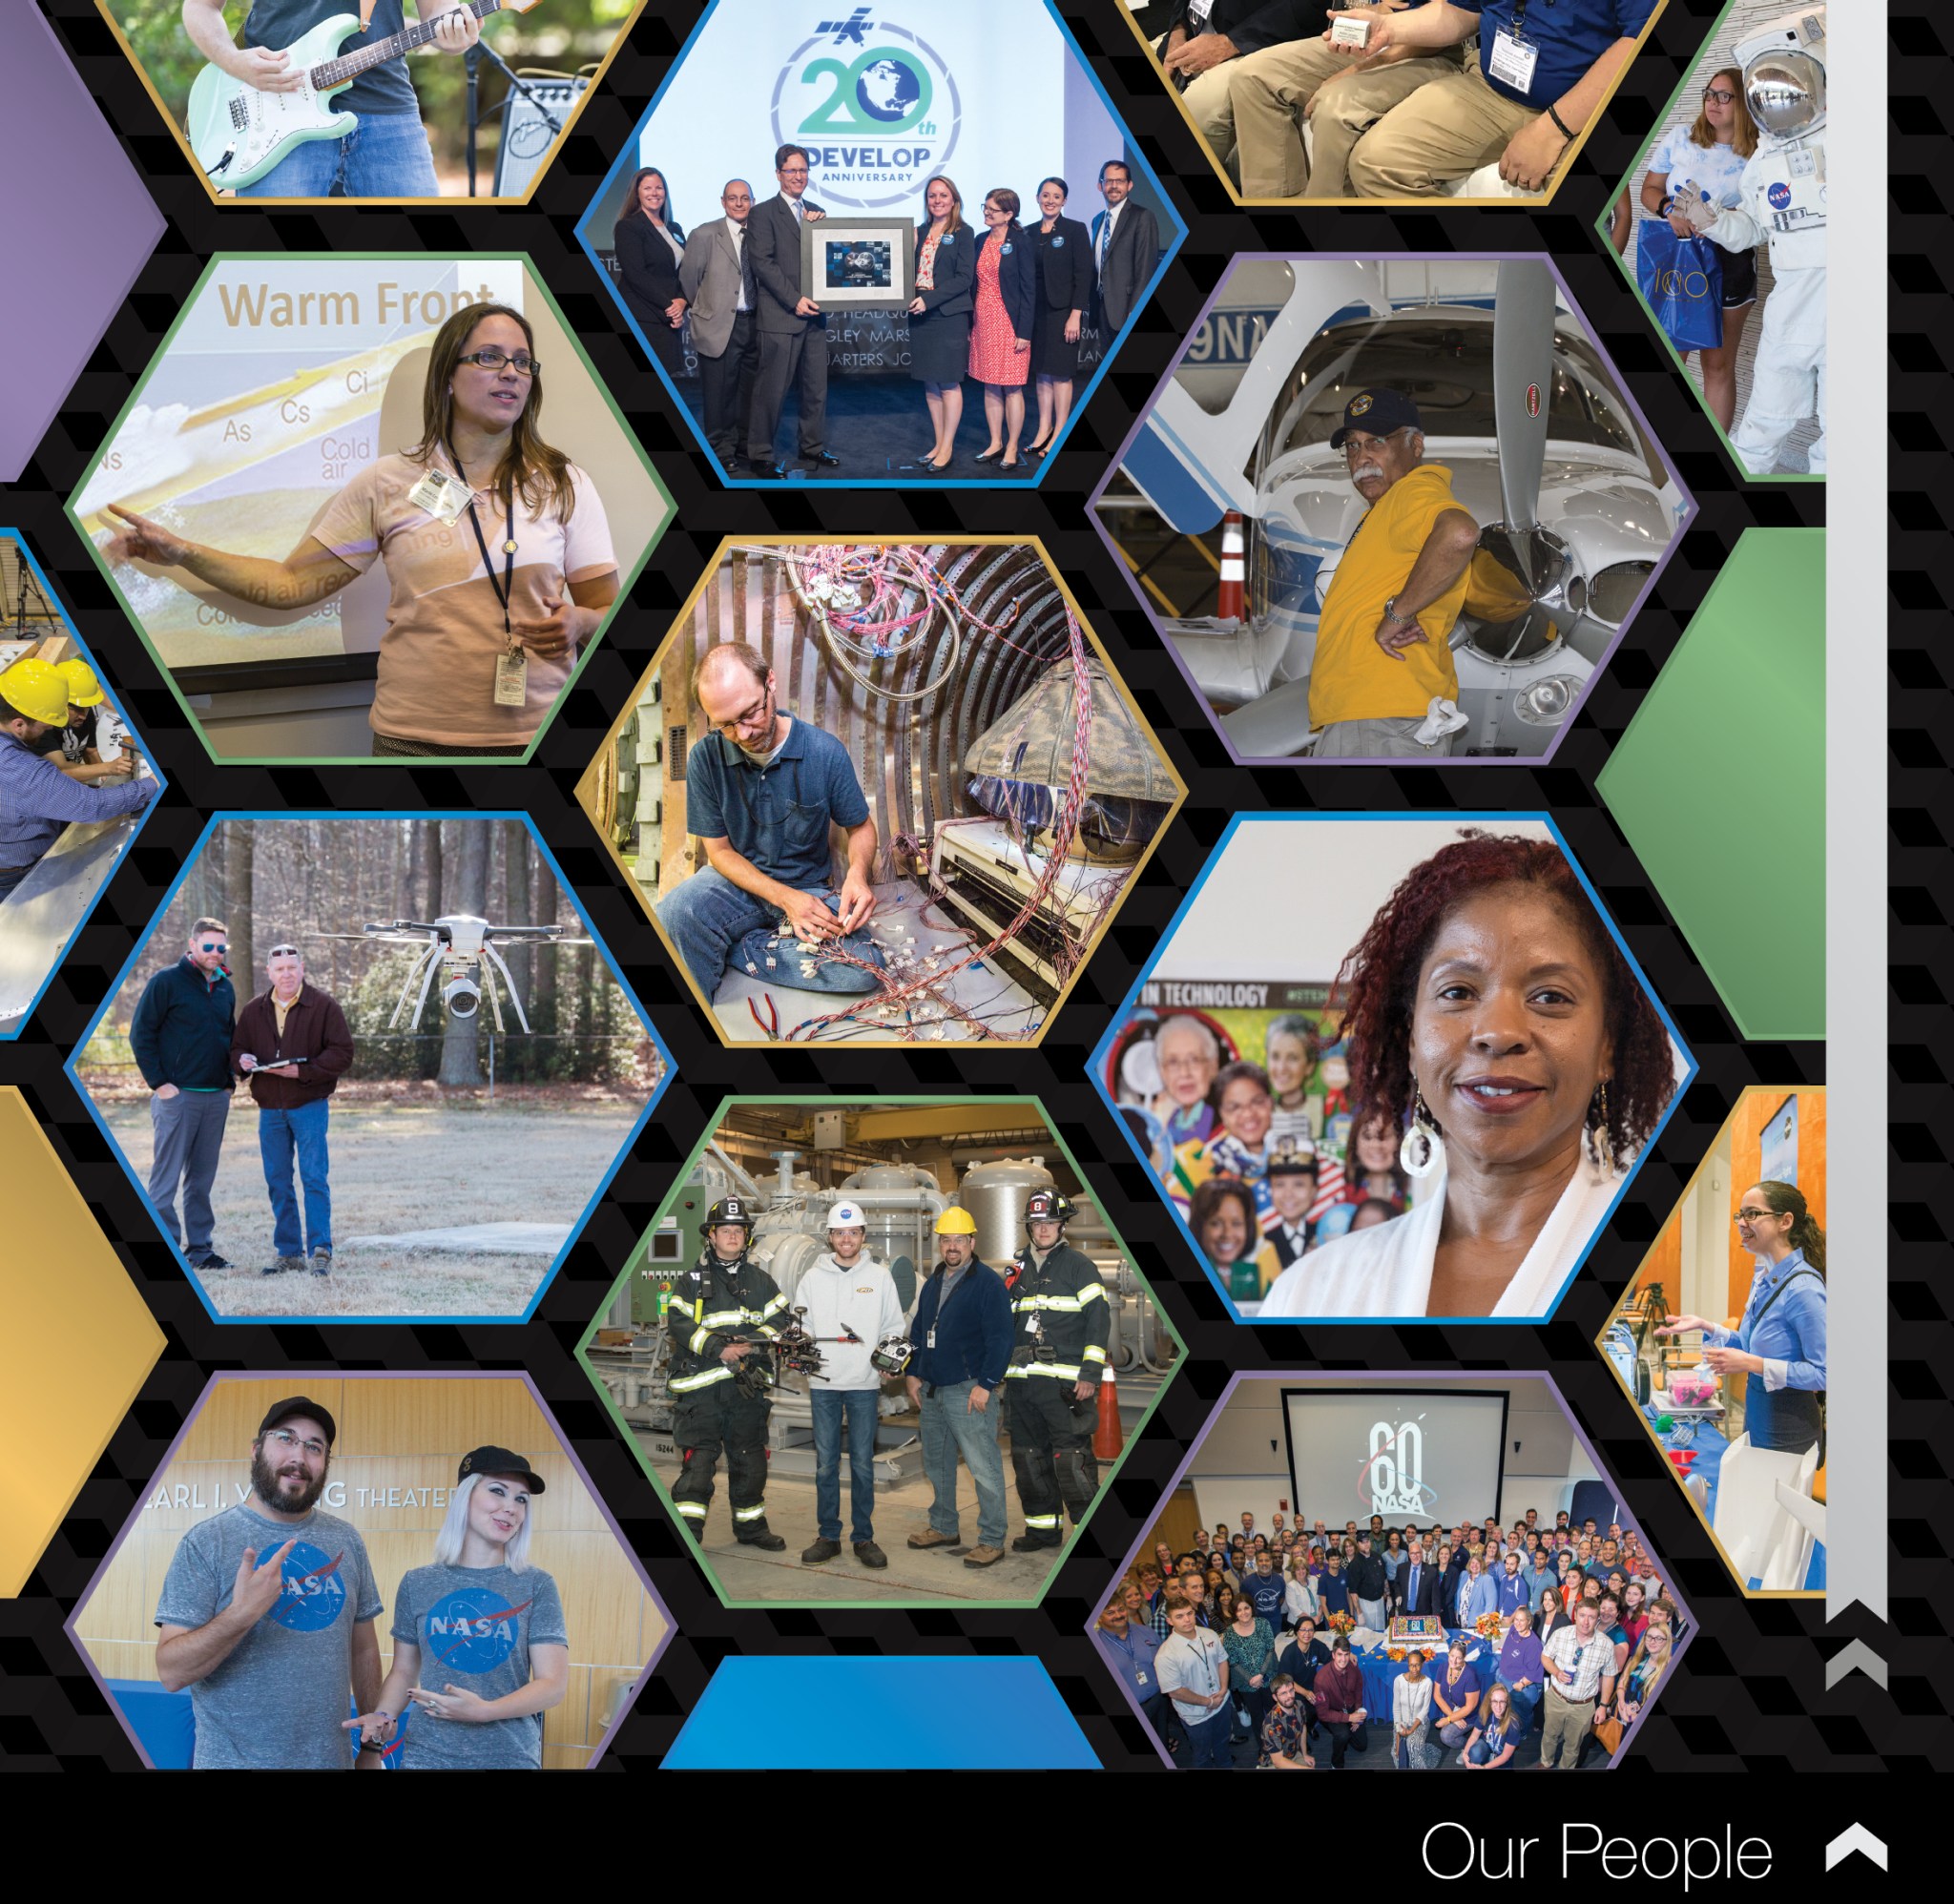 Employee image from Langley's 2018 annual report